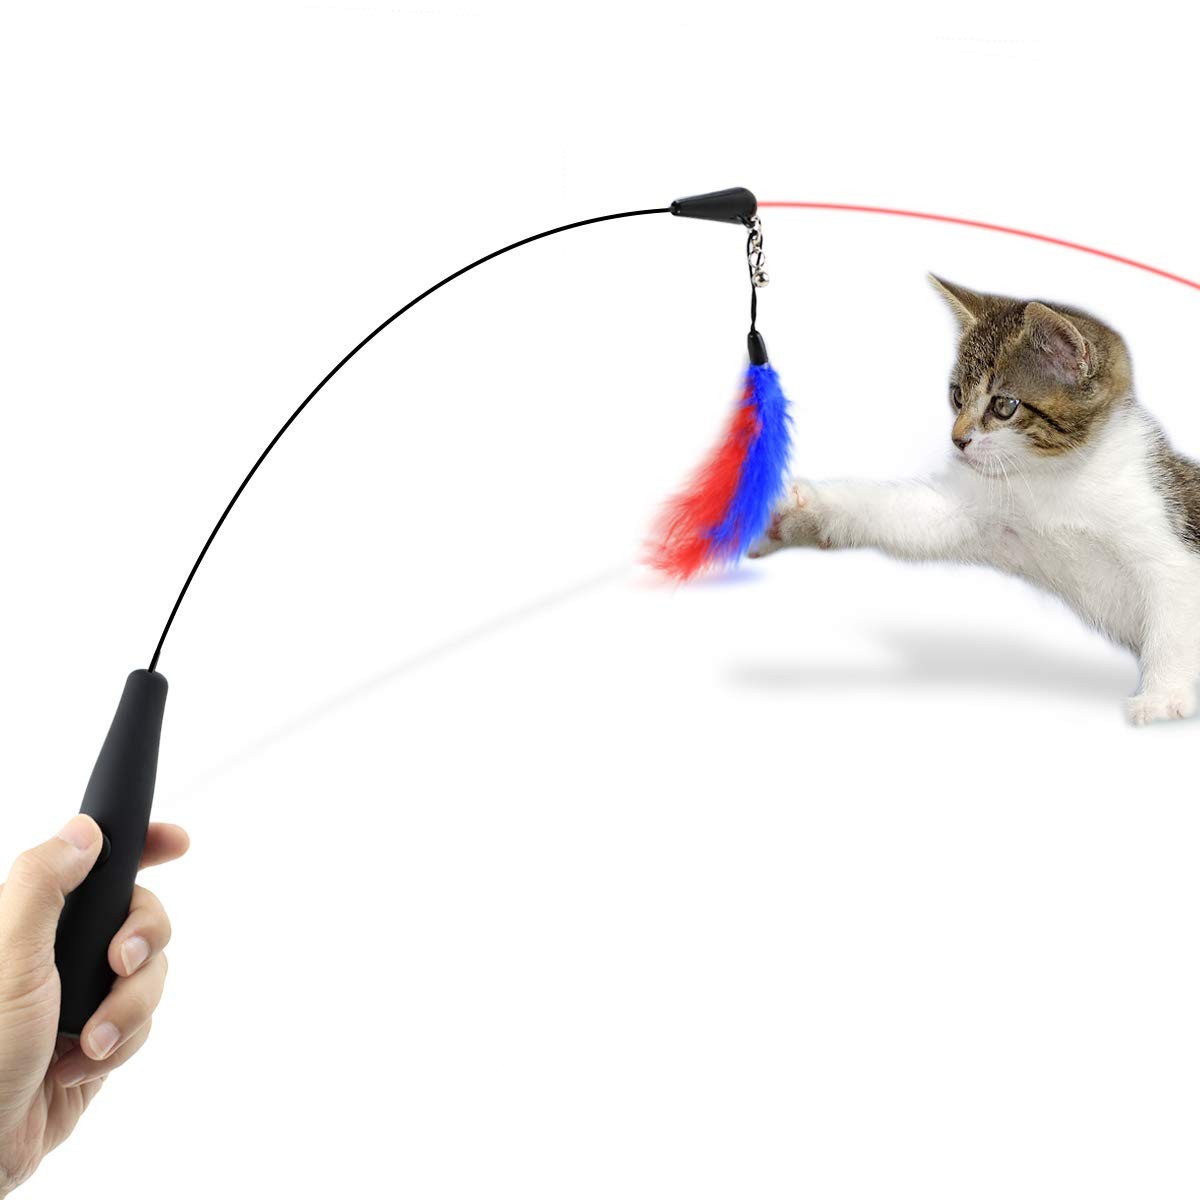 Enjoying Cat Toys Interactive - 2 in 1 Feather and Light Teaser Interactive Cat Wand Toy for Hallowe